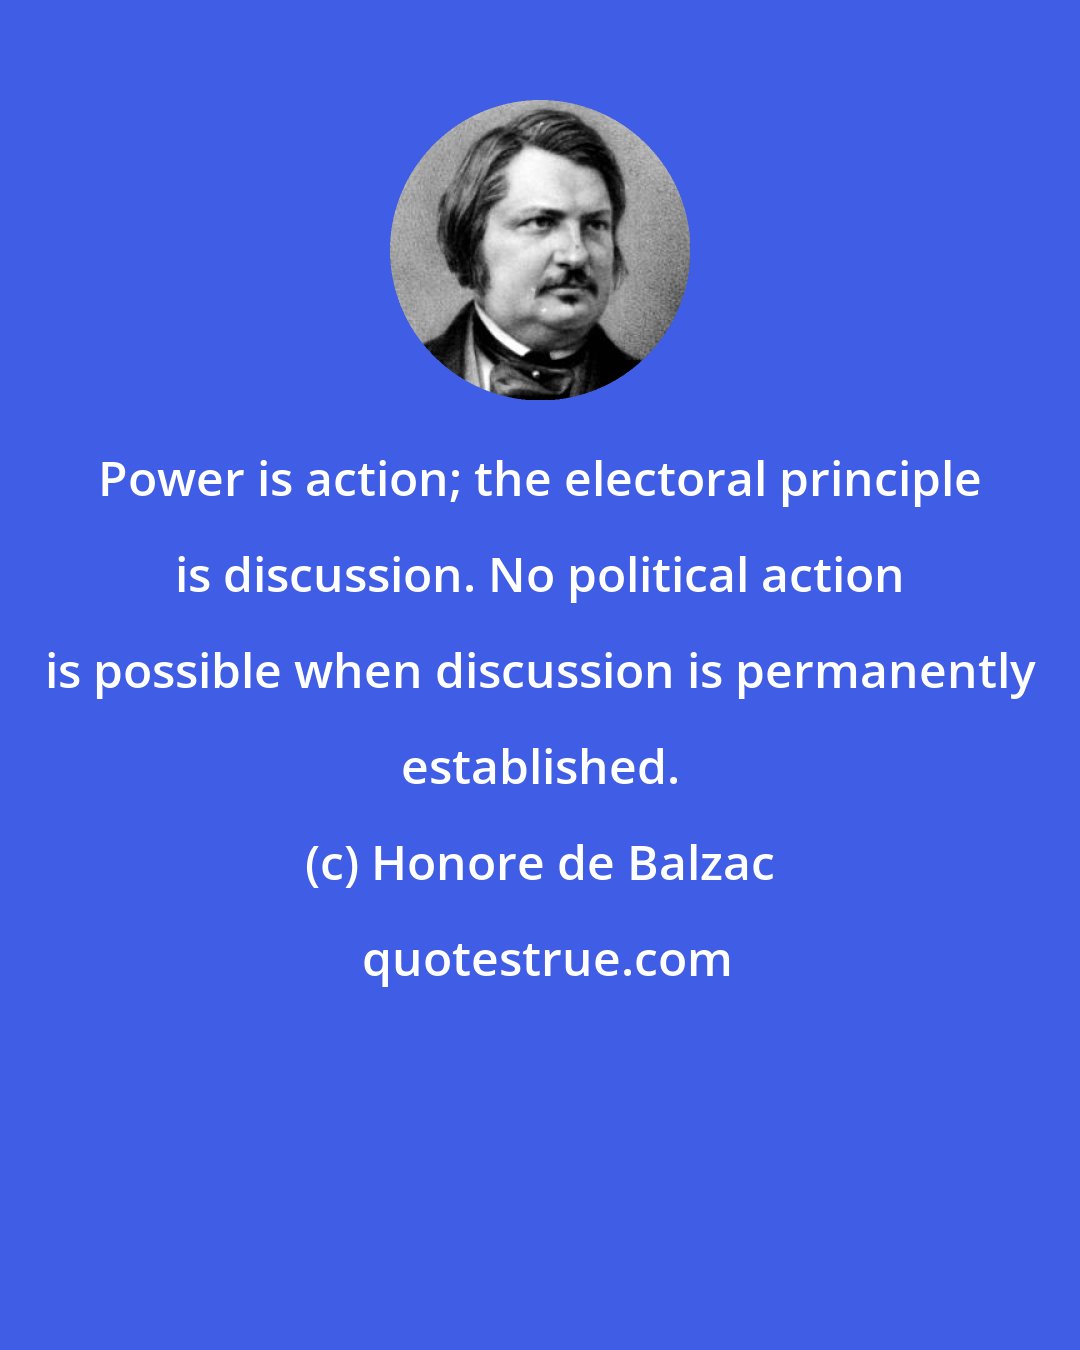 Honore de Balzac: Power is action; the electoral principle is discussion. No political action is possible when discussion is permanently established.